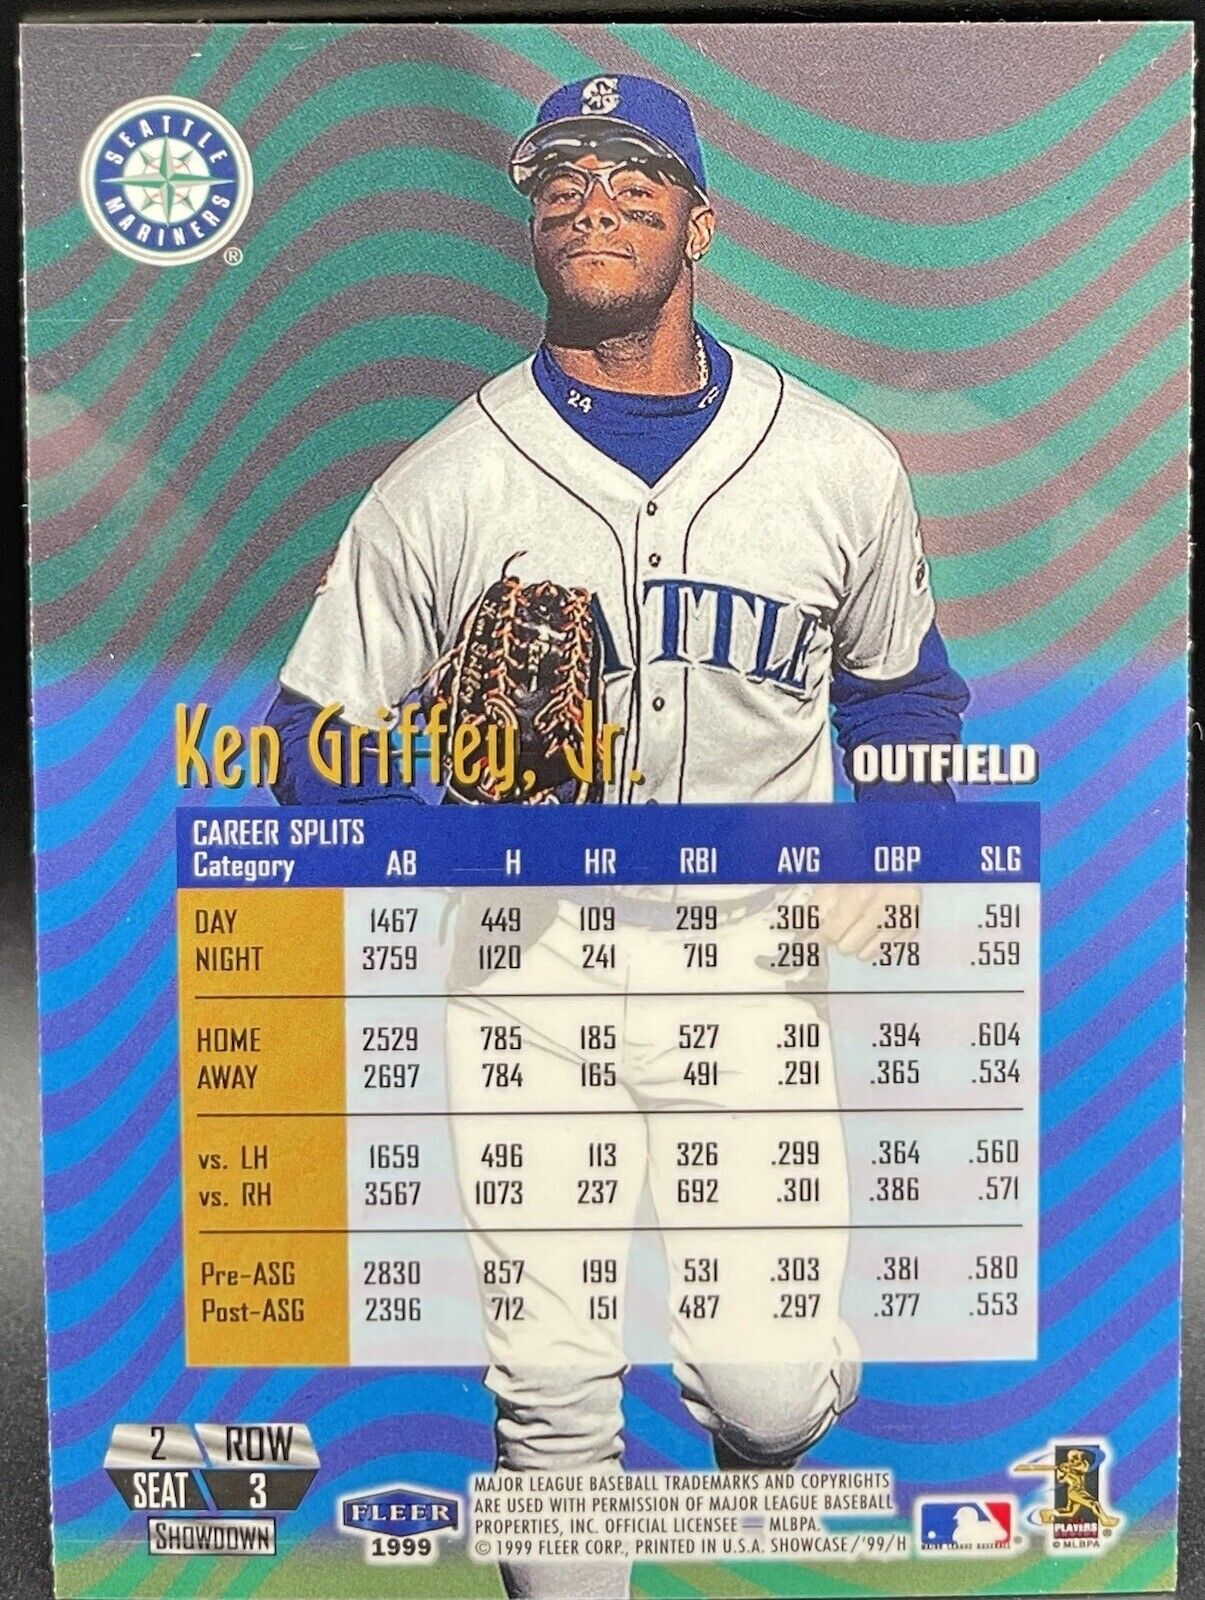 Ken Griffey Jr 1999 Flair Showcase - Row 2 #3 Seattle Mariners Great Condition🔥